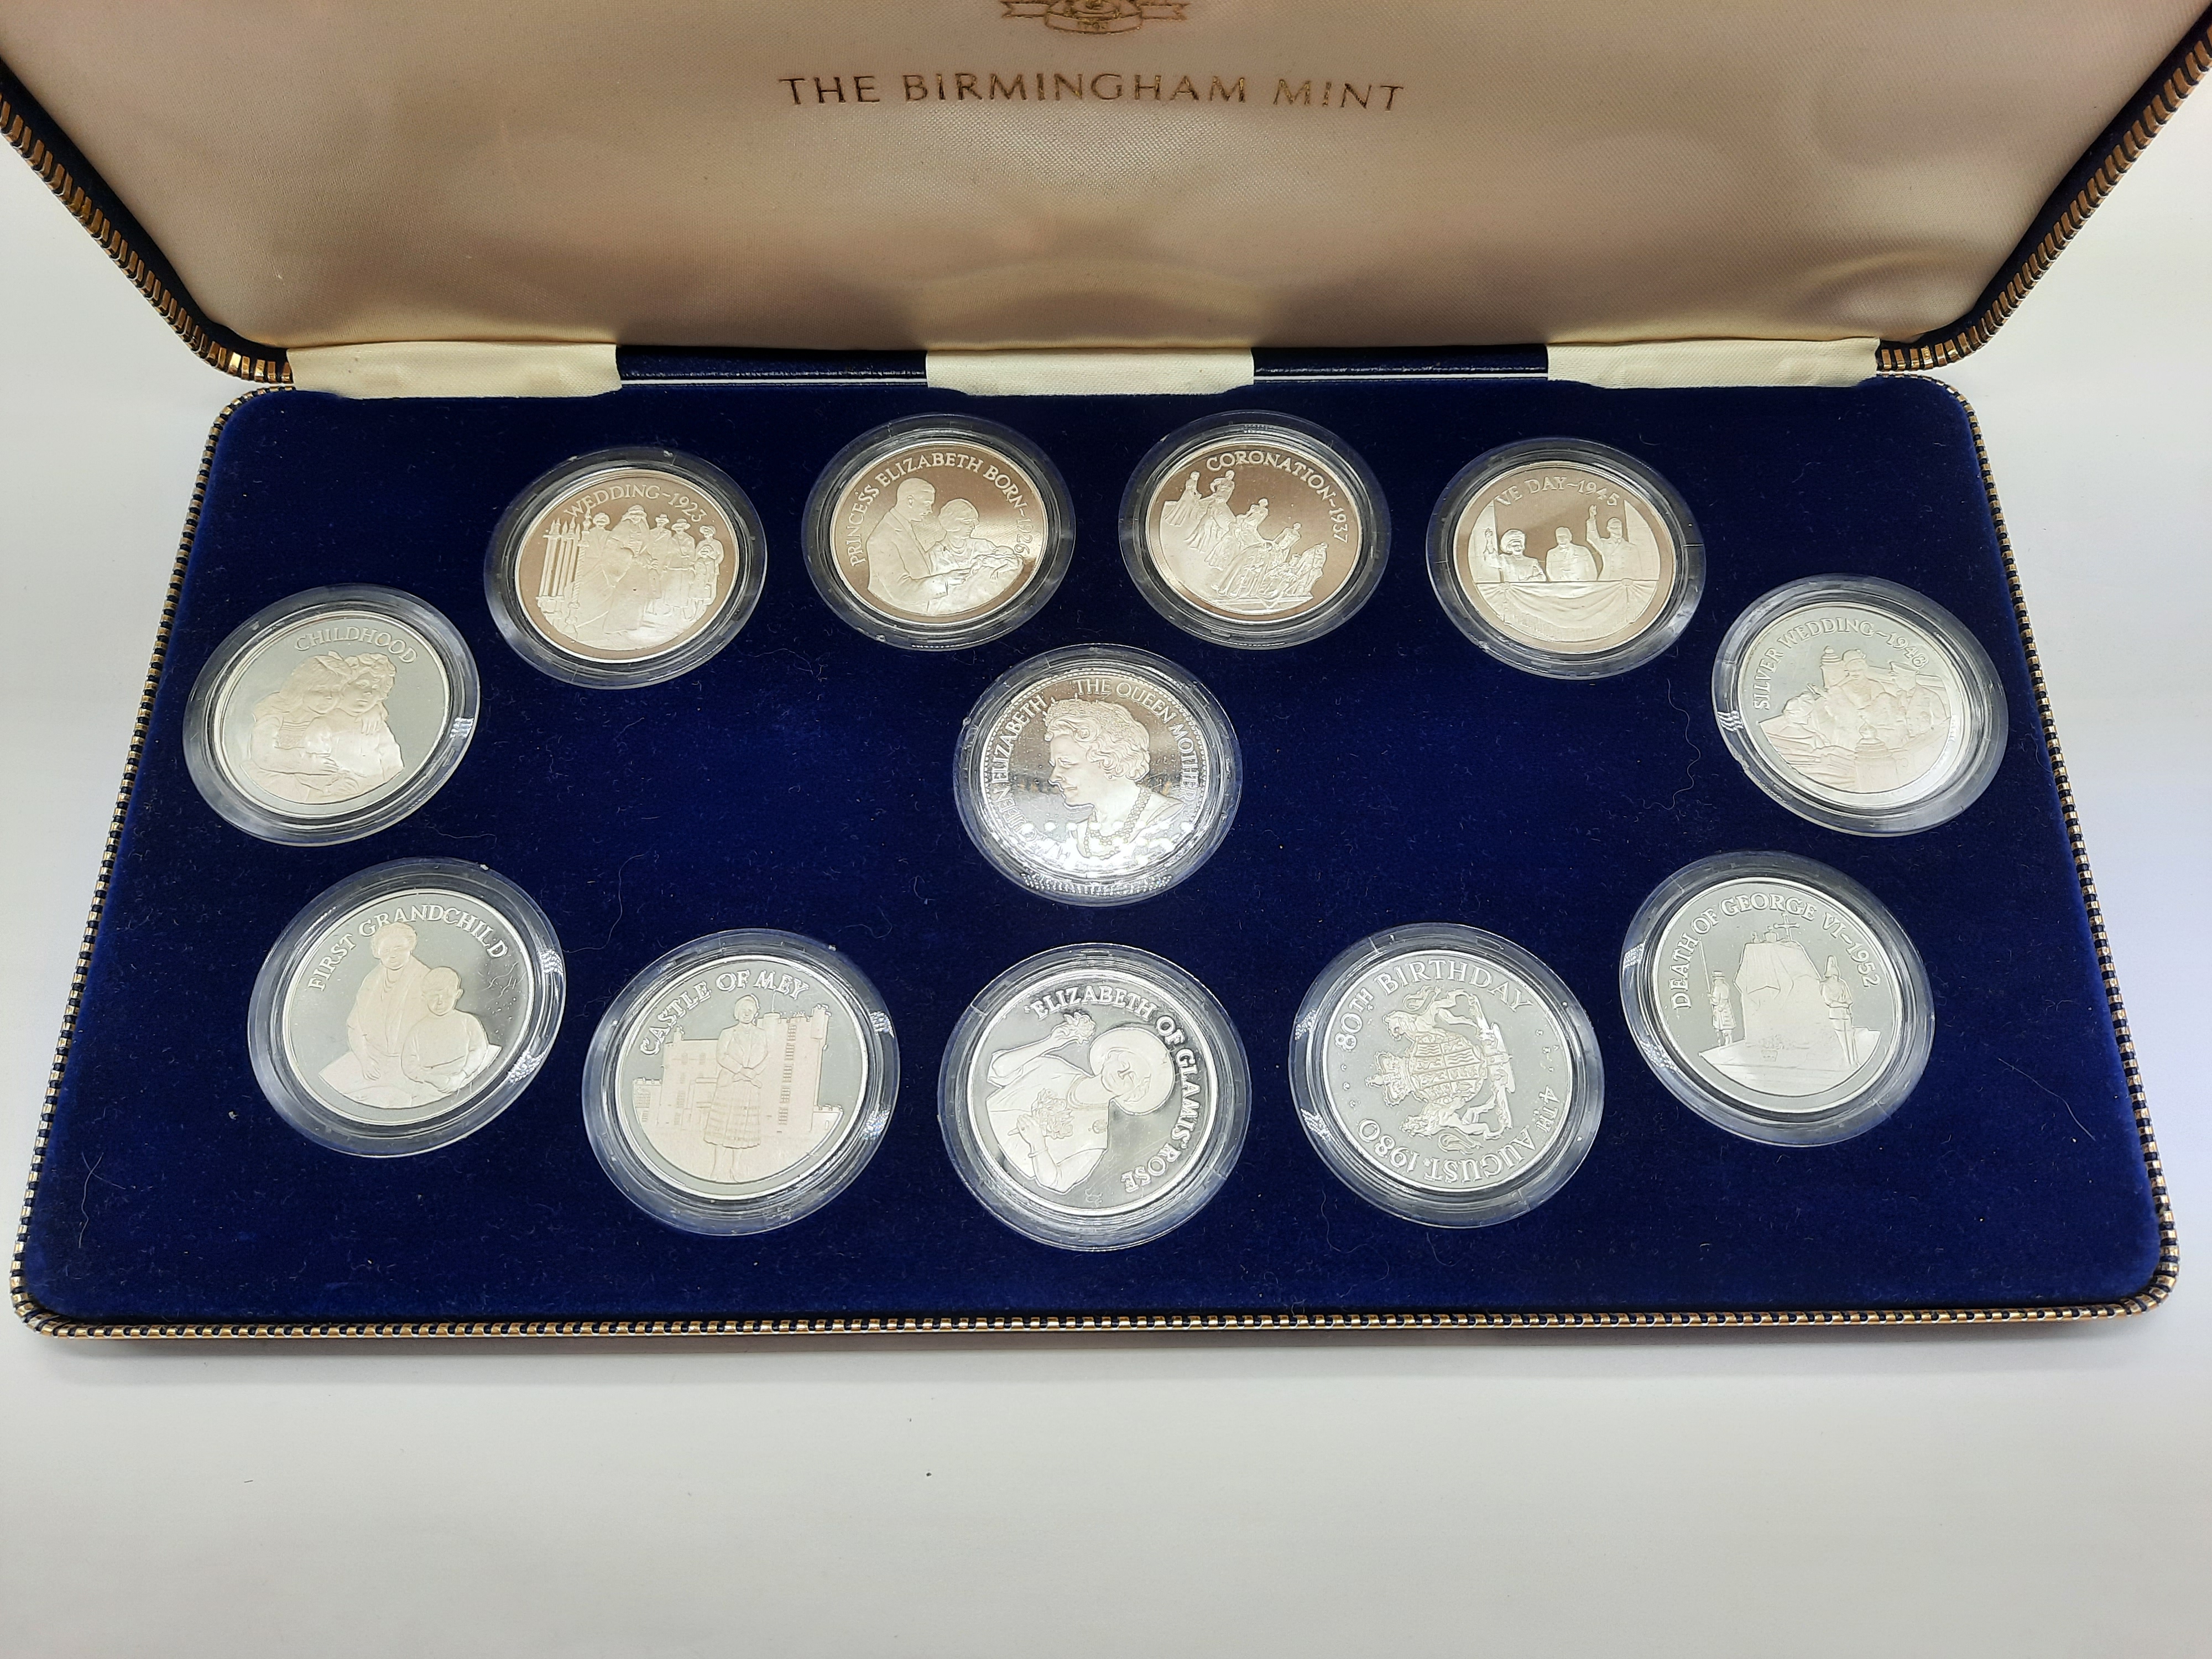 BIRMINGHAM MINT STERLING CROWN HM QUEENS MOTHER APPROX 312G COLLECTION OF 12 COINS